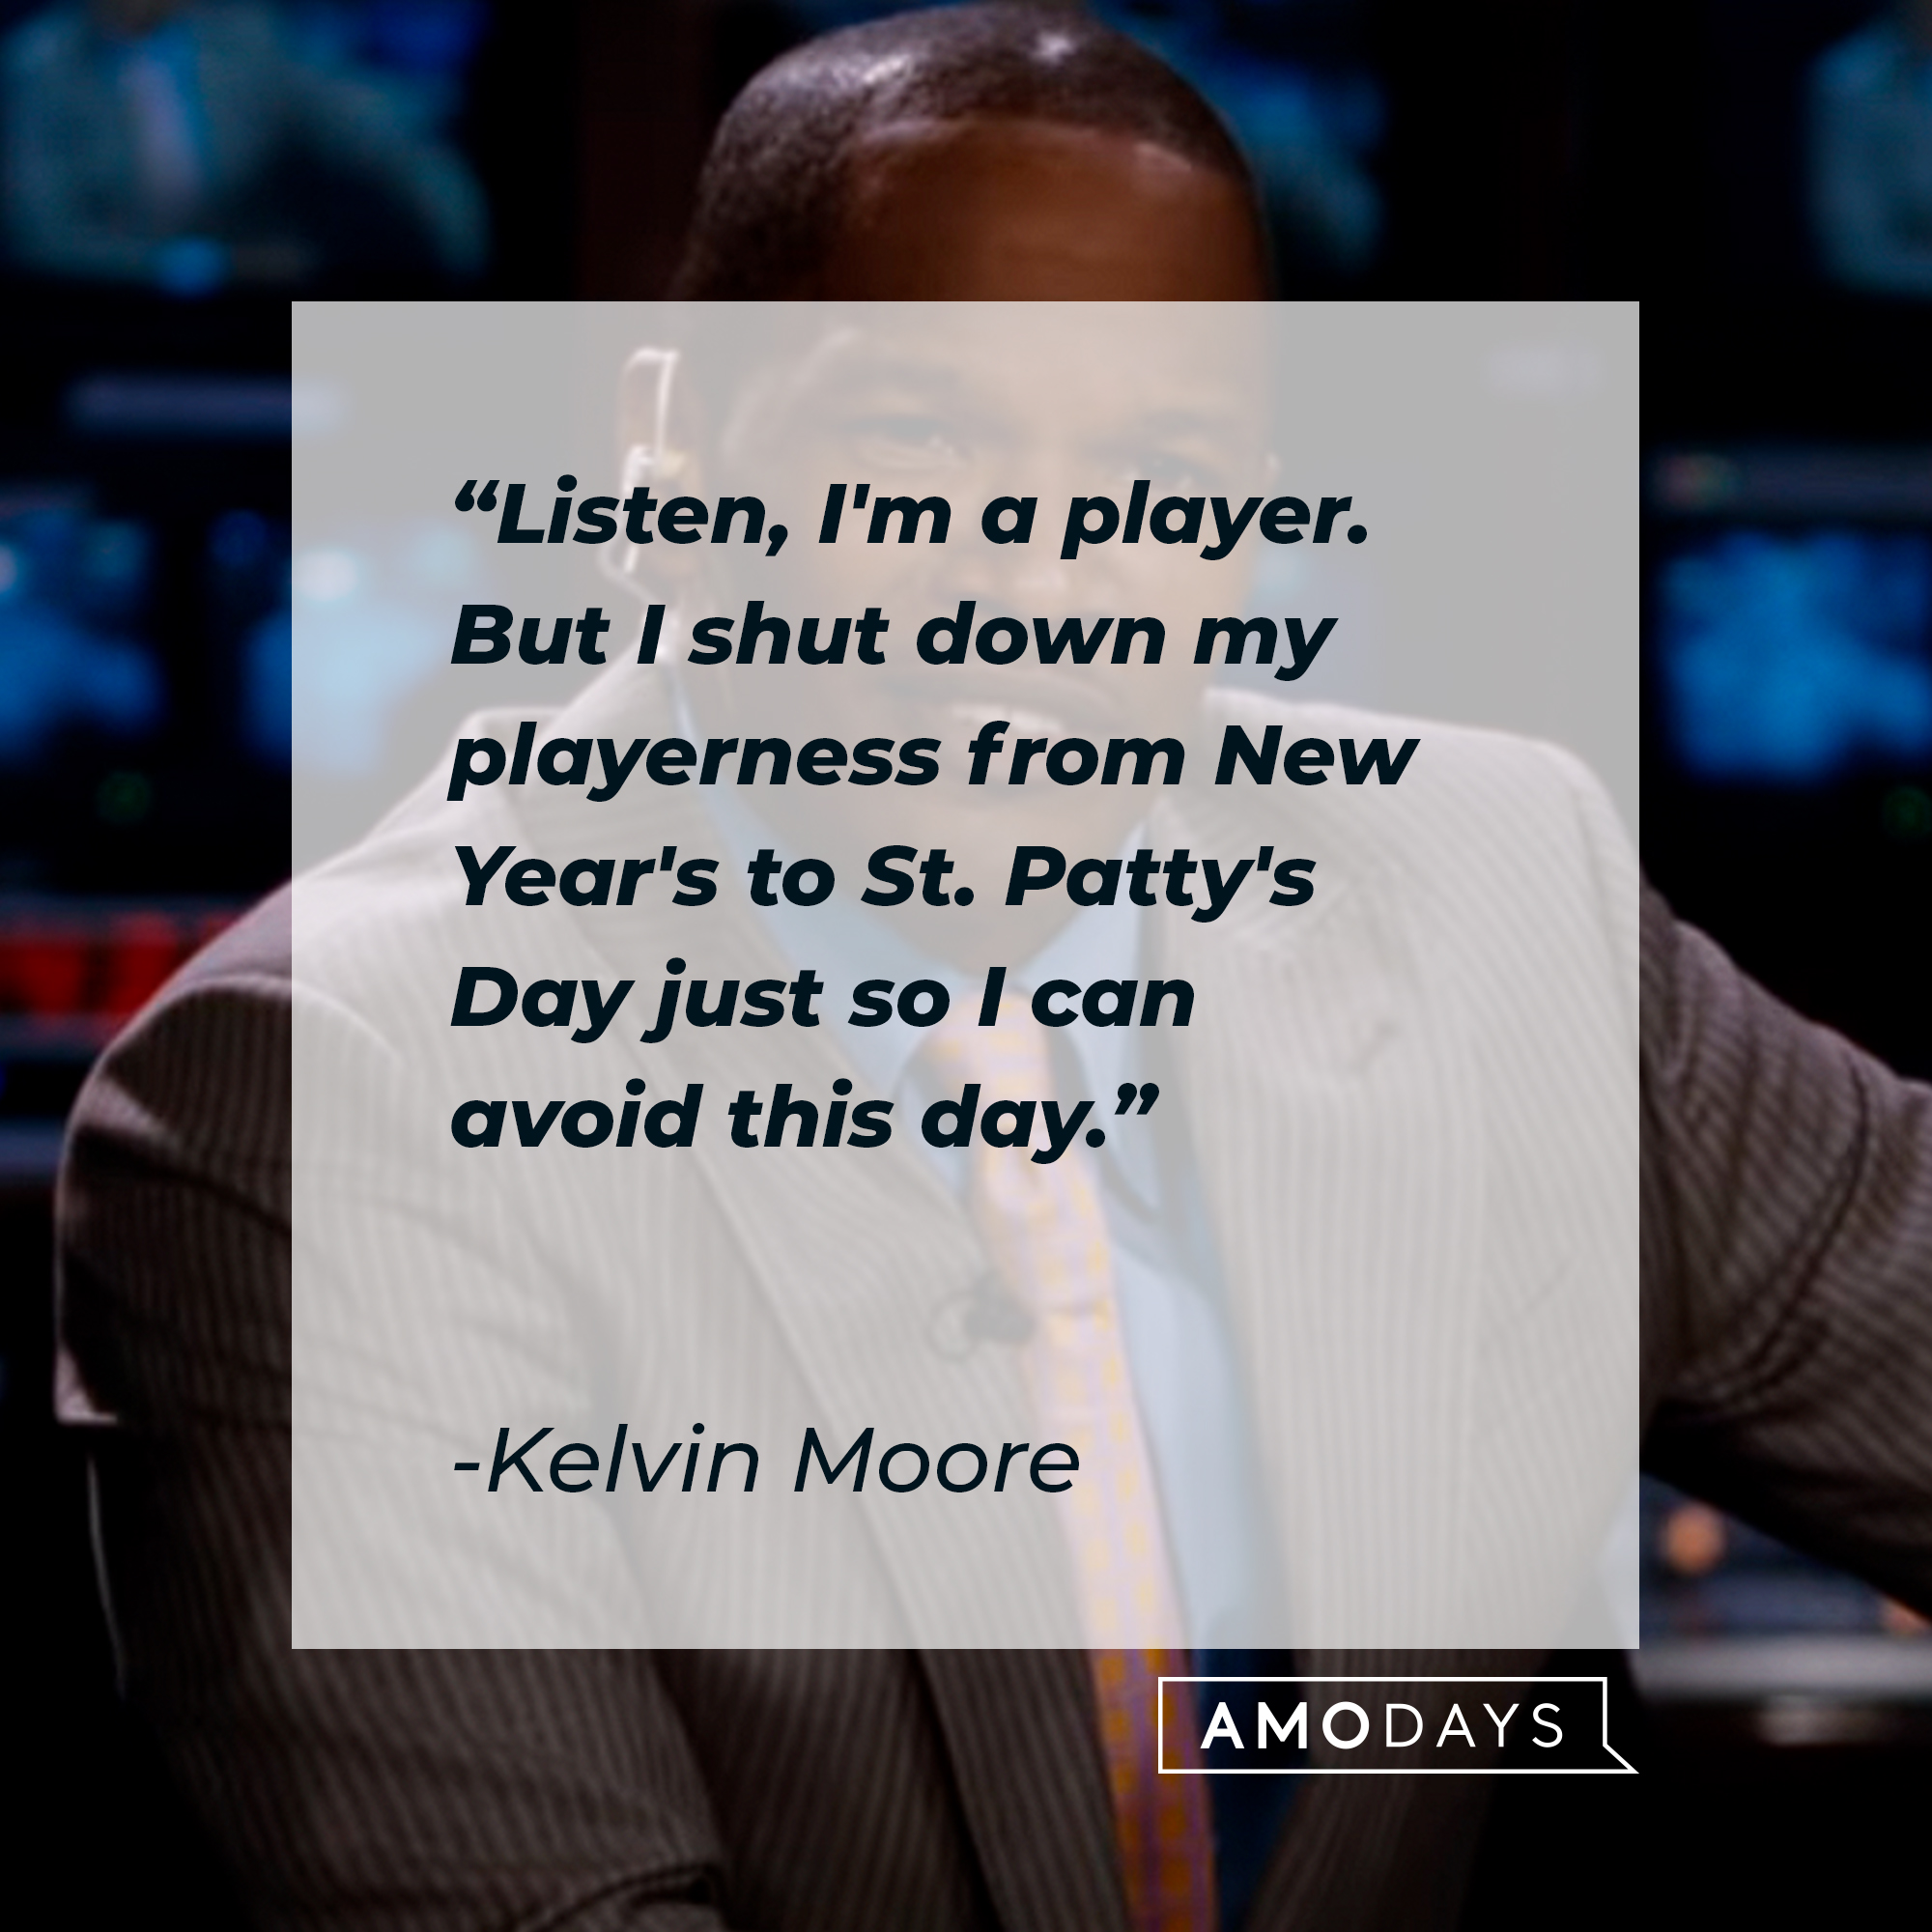 Kelvin Moore's quote: "Listen, I'm a player. But I shut down my playerness from New Year's to St. Patty's Day just so I can avoid this day" | Source: Youtube.com/WarnerBrosPictures